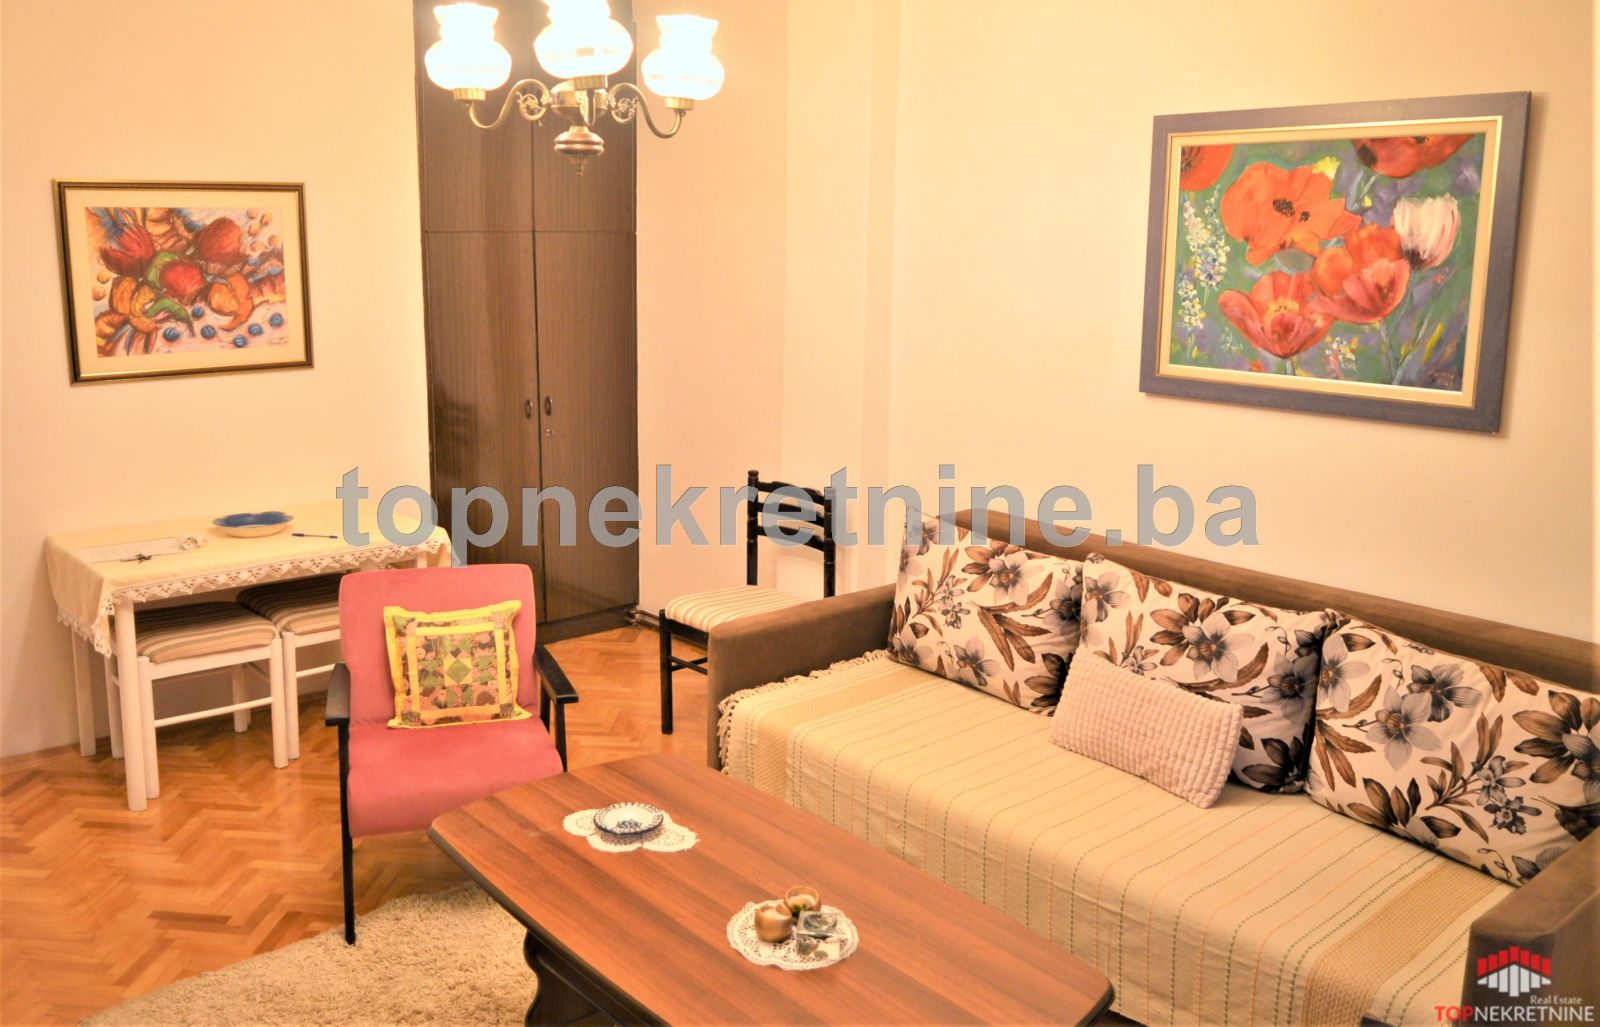 Furnished, 1BDR apartment with 51 SqM, with two balconies, Mejtas